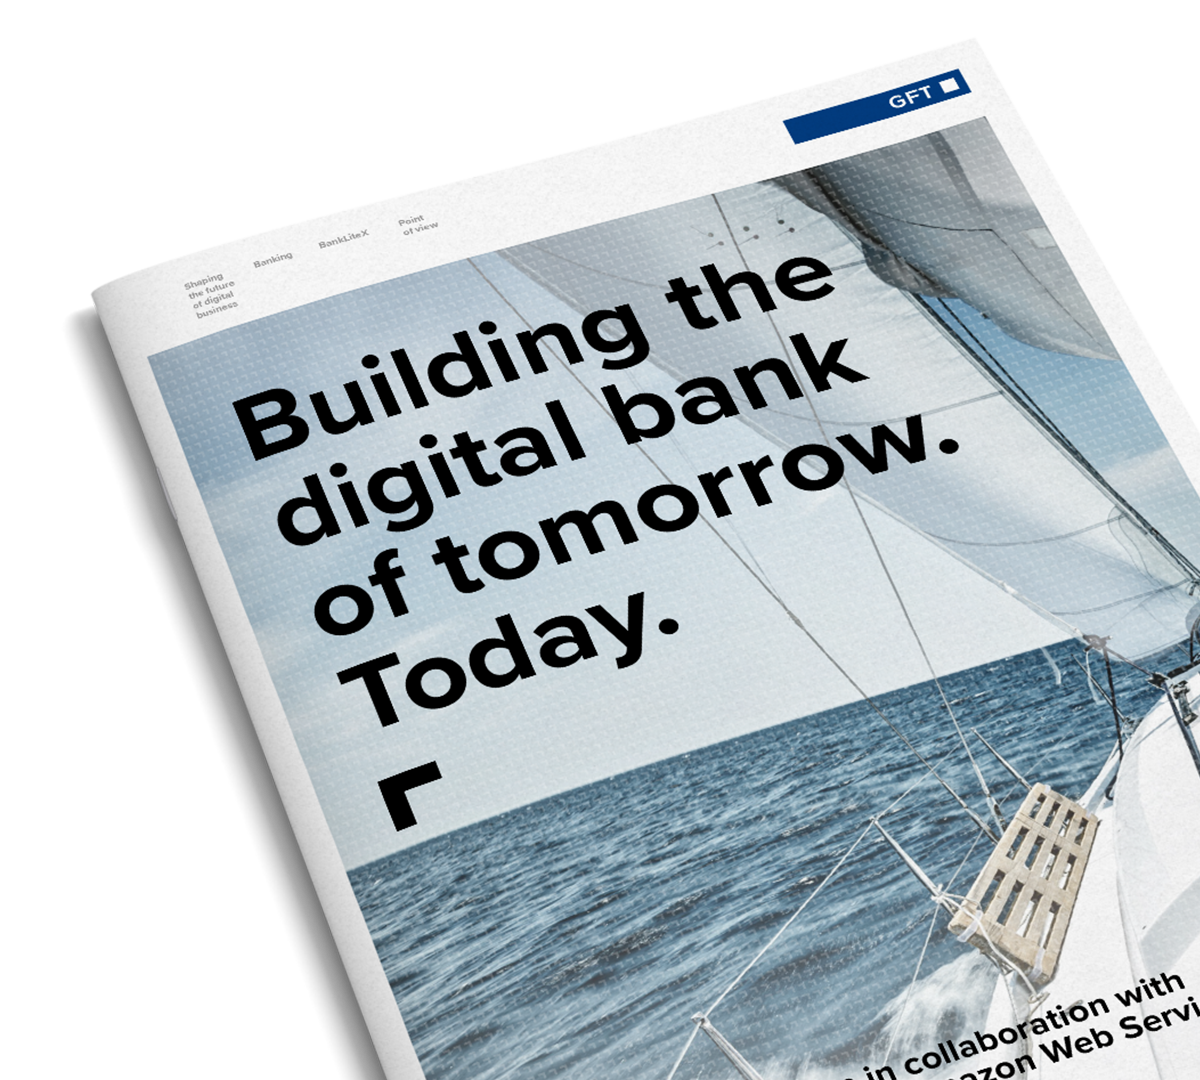 Thought leadership: BankLiteX - Building the bank of tomorrow. Today.